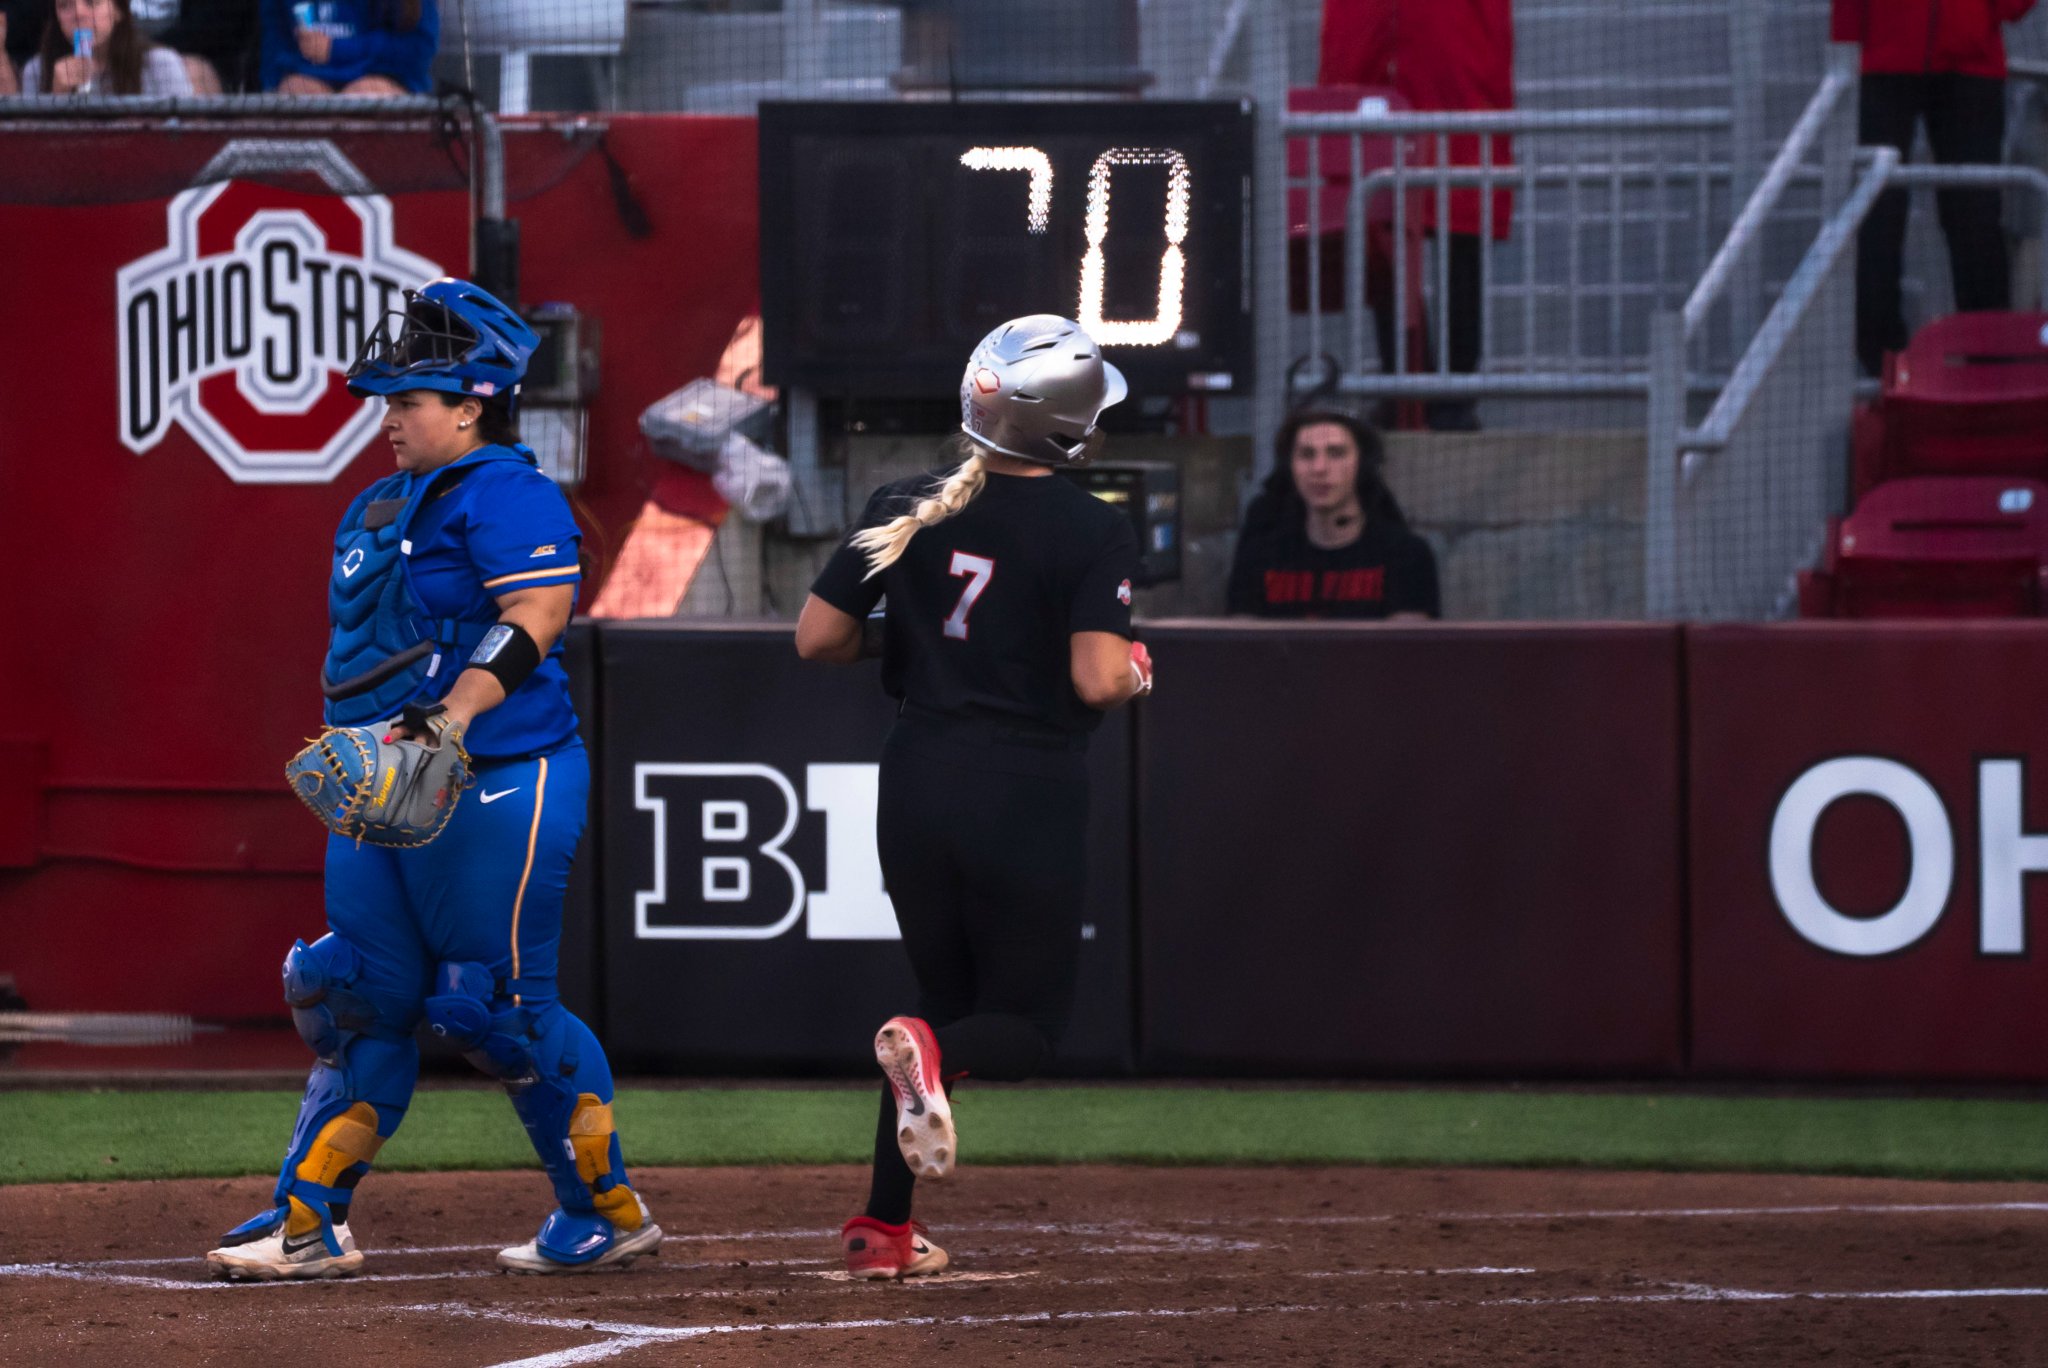 Softball: Ohio State prevails through the weather, wears down Pittsburgh 3-2 Wednesday